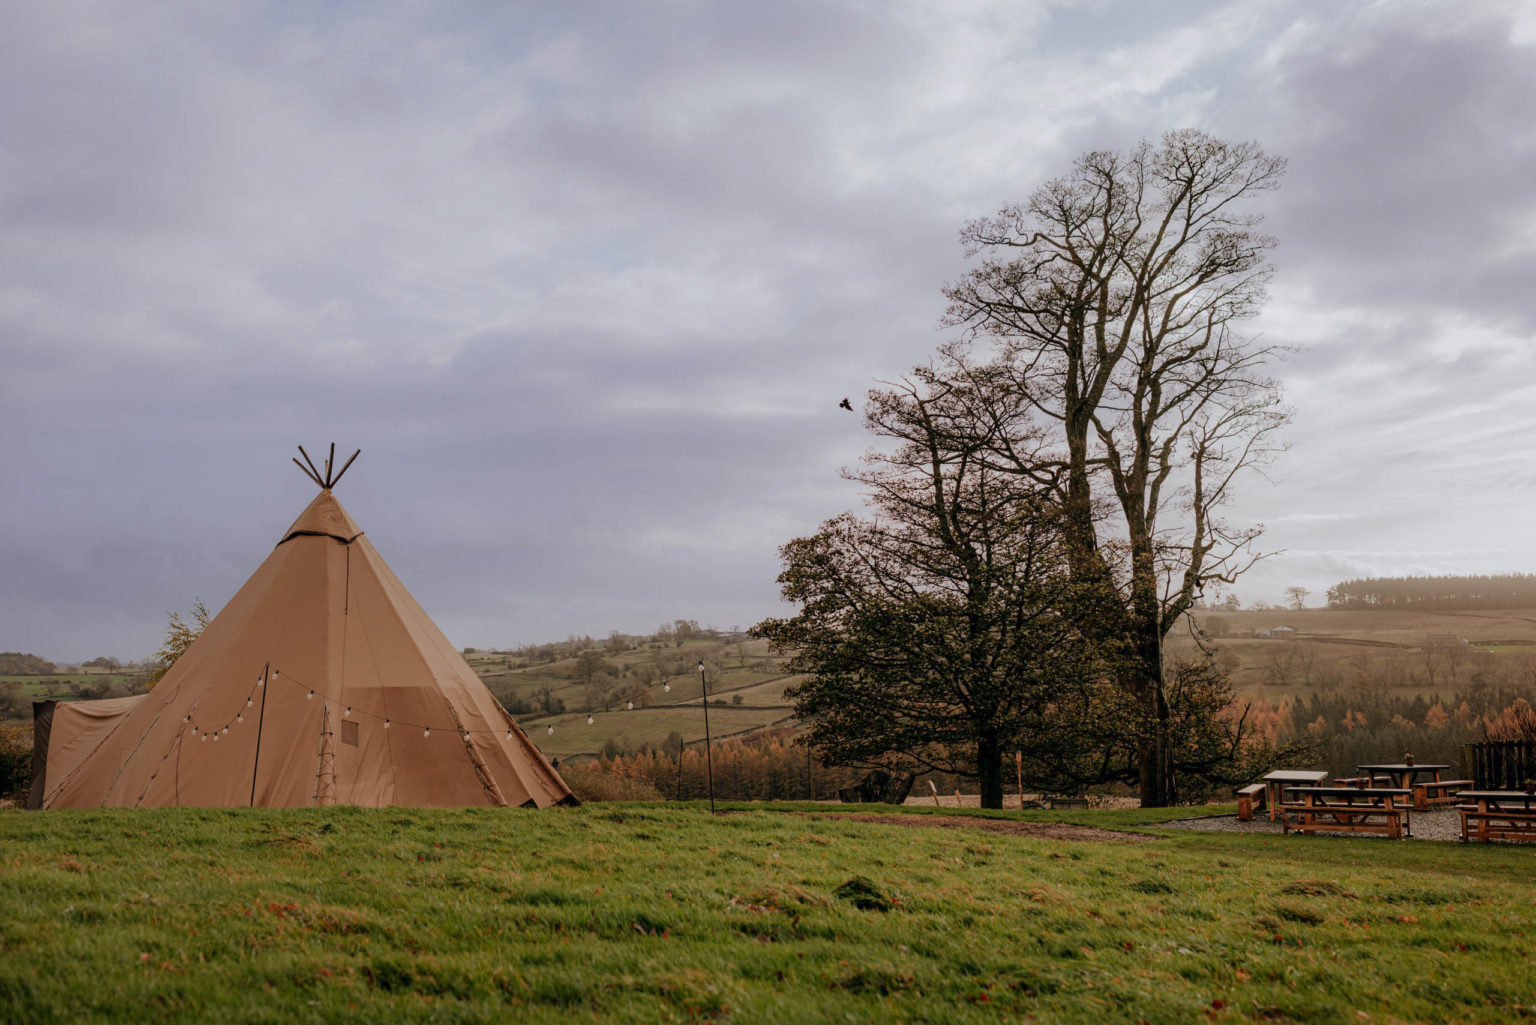 Tipi outside in a field at Swinton Bivouac in North Yorkshire